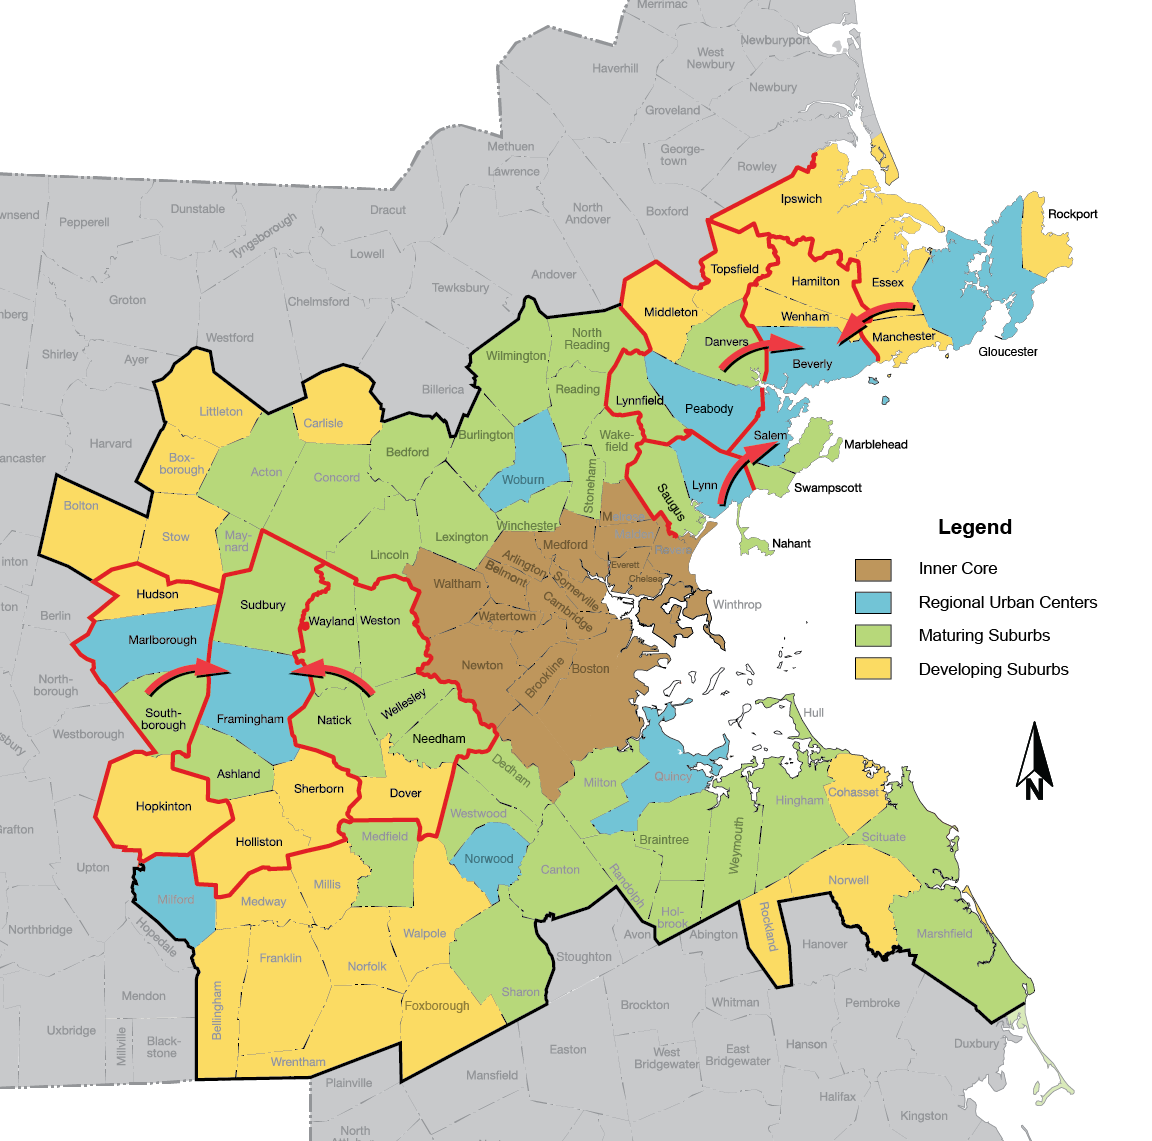 Figure 3-7 is a map of the Boston Region MPO area demarcating municipalities by Inner Core, Regional Urban Centers, Maturing Suburbs and Developing Suburbs. Figure 3-7 also depicts notable suburban trip flows by municipality.